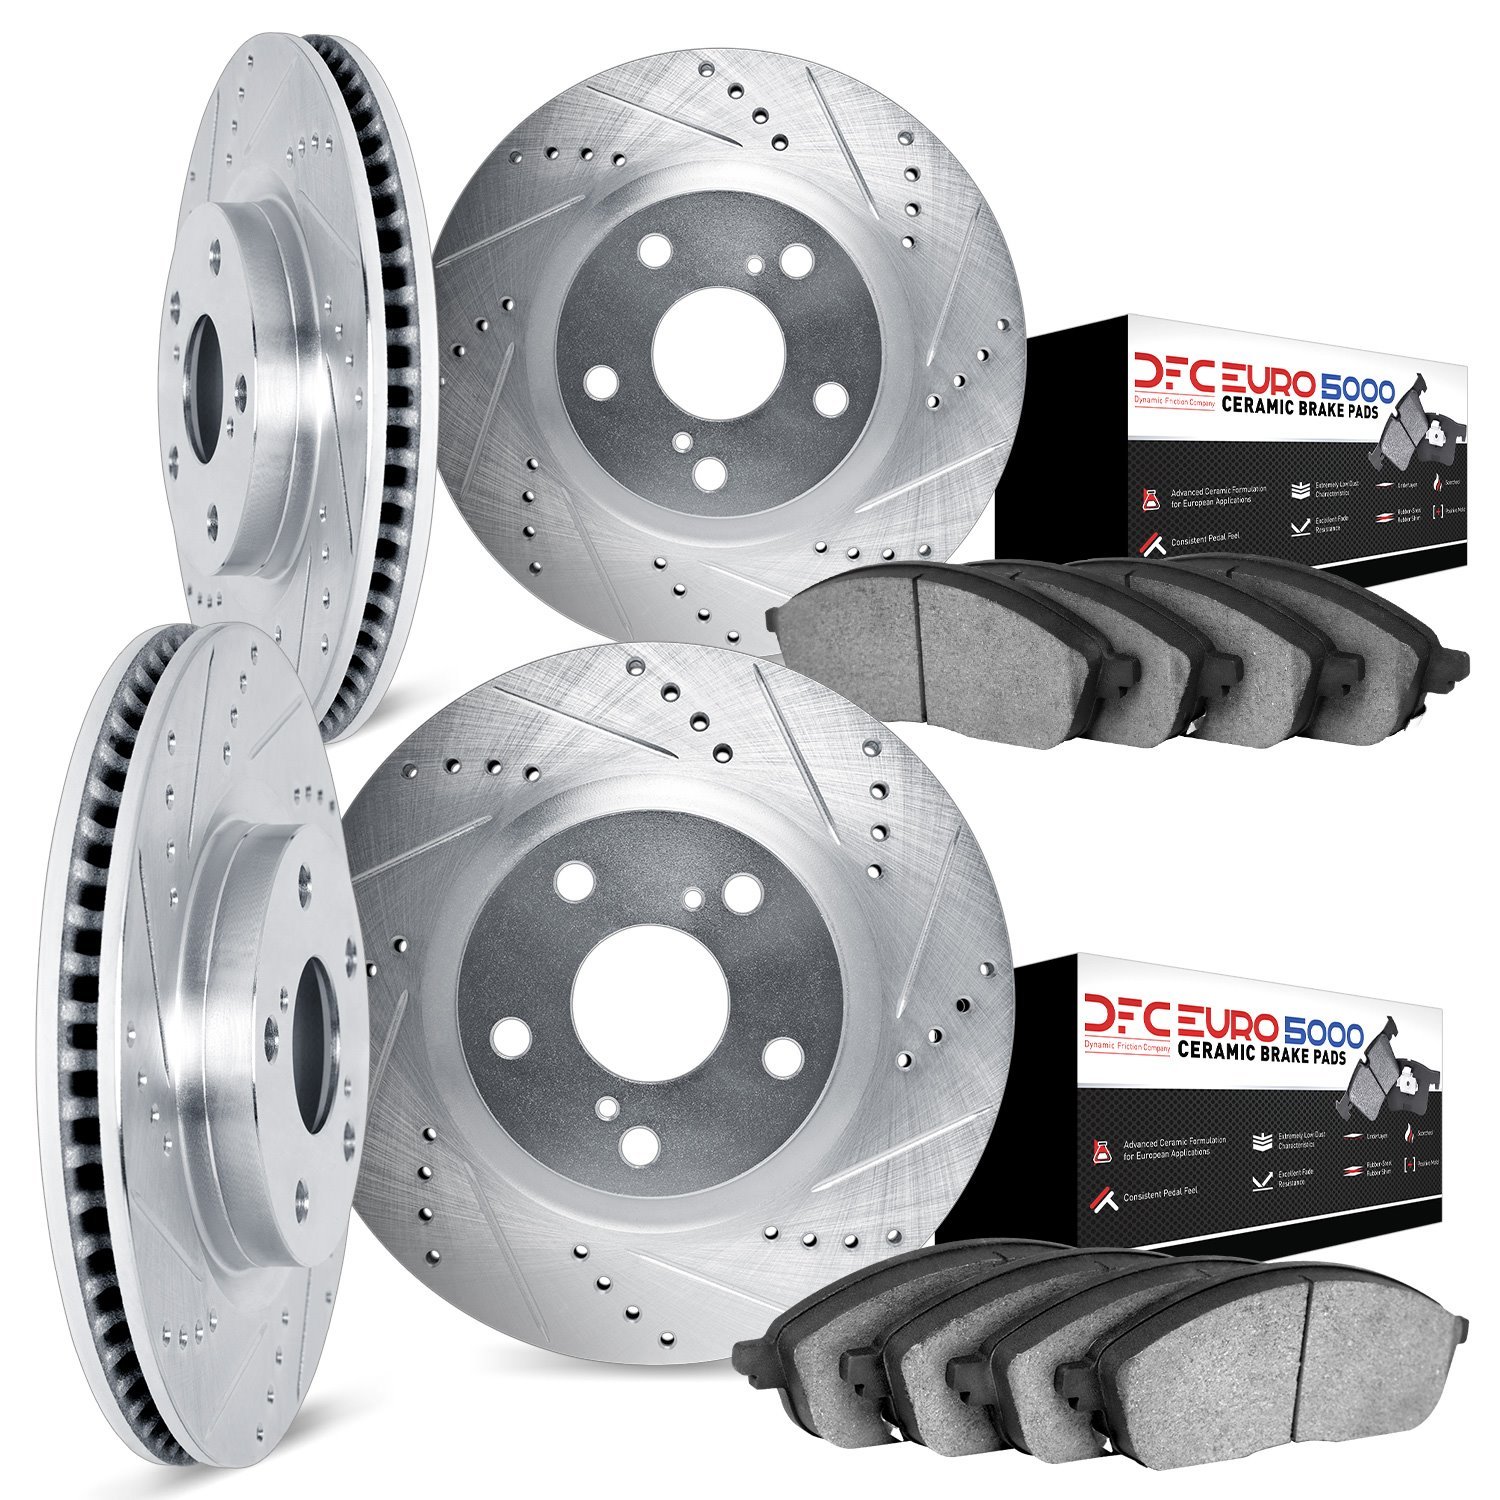 7604-63017 Drilled/Slotted Brake Rotors w/5000 Euro Ceramic Brake Pads Kit [Silver], 2017-2017 Mercedes-Benz, Position: Front an